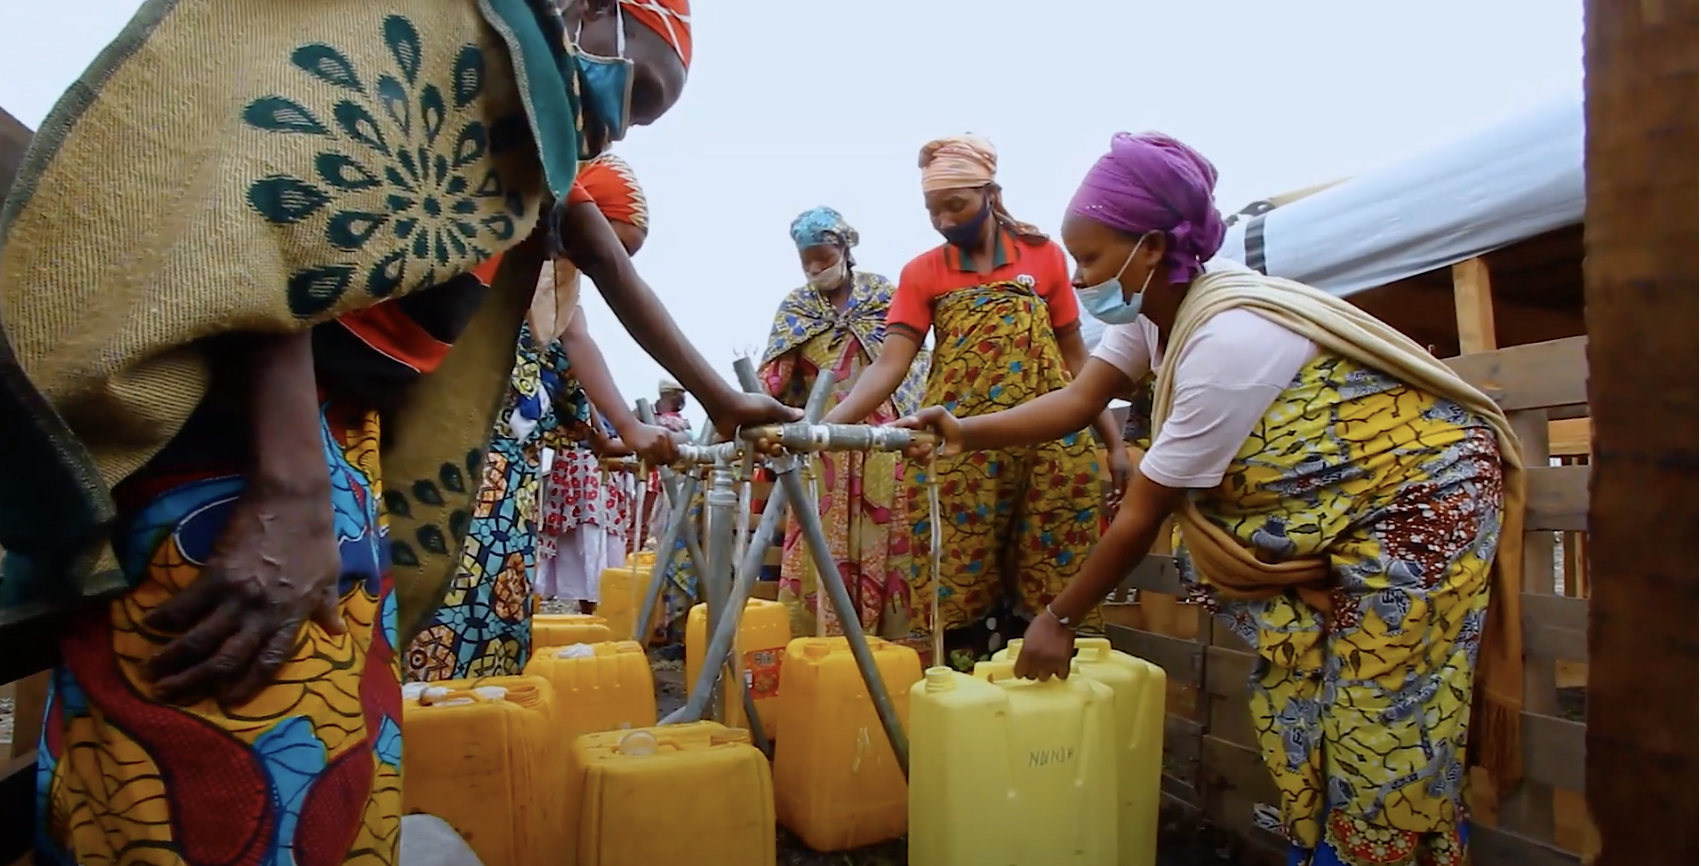 A group of people filling jerry cans at a water station.